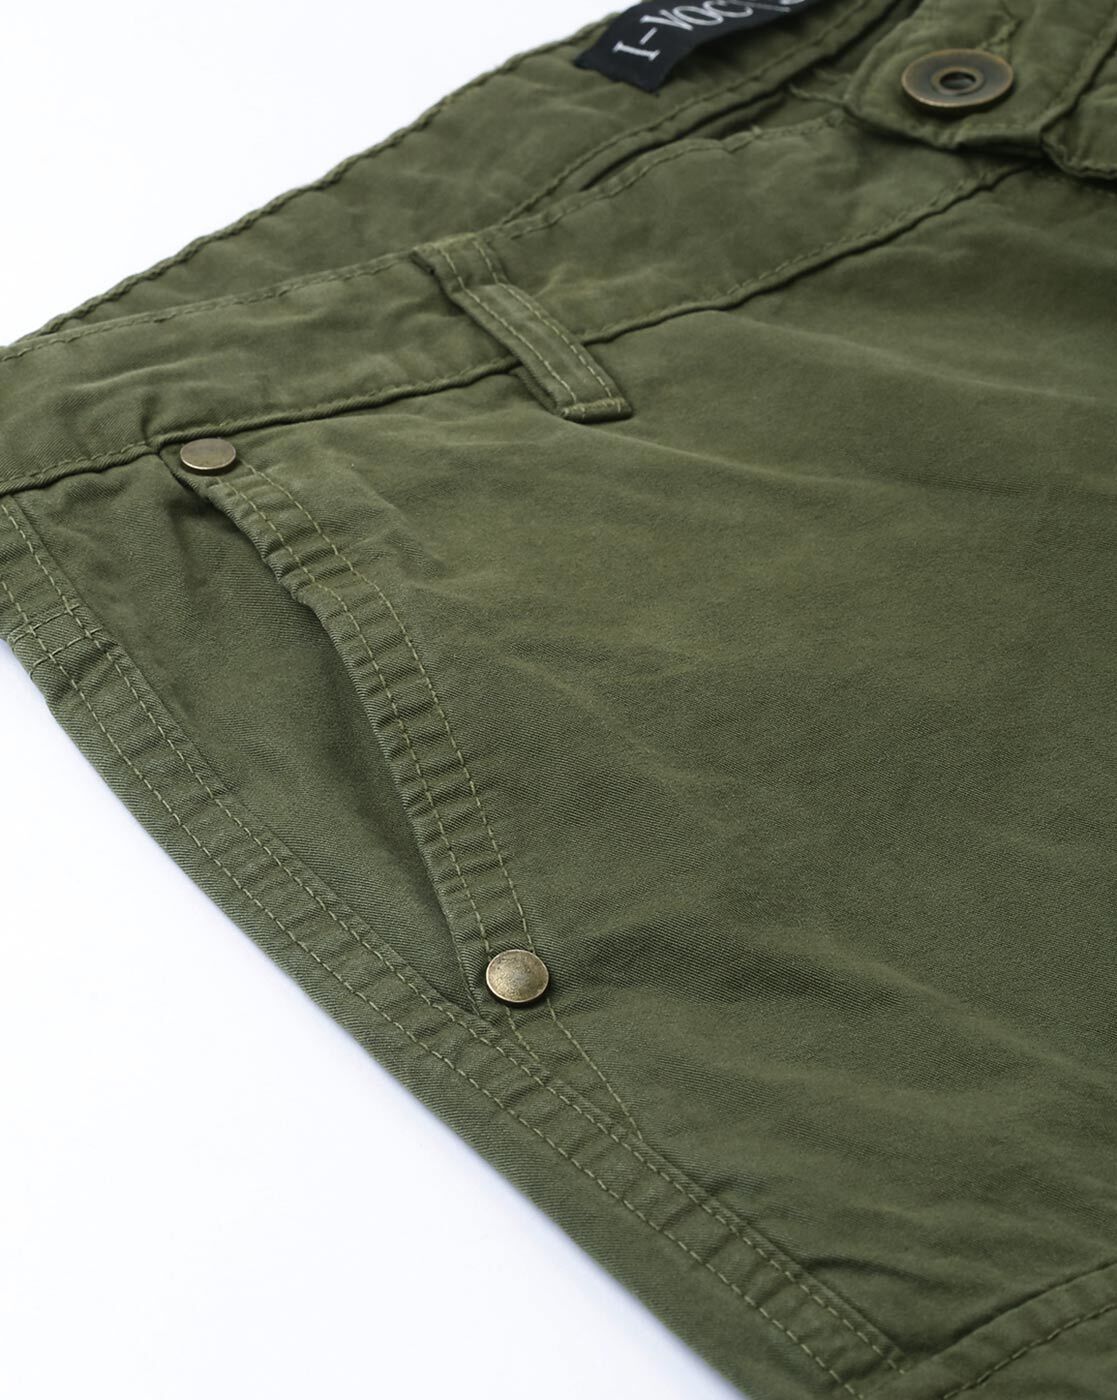 Abercrombie  Fitch Paratrooper Baggy Cargo Pants VTG Army Green Mens Sz M  34  Inox Wind